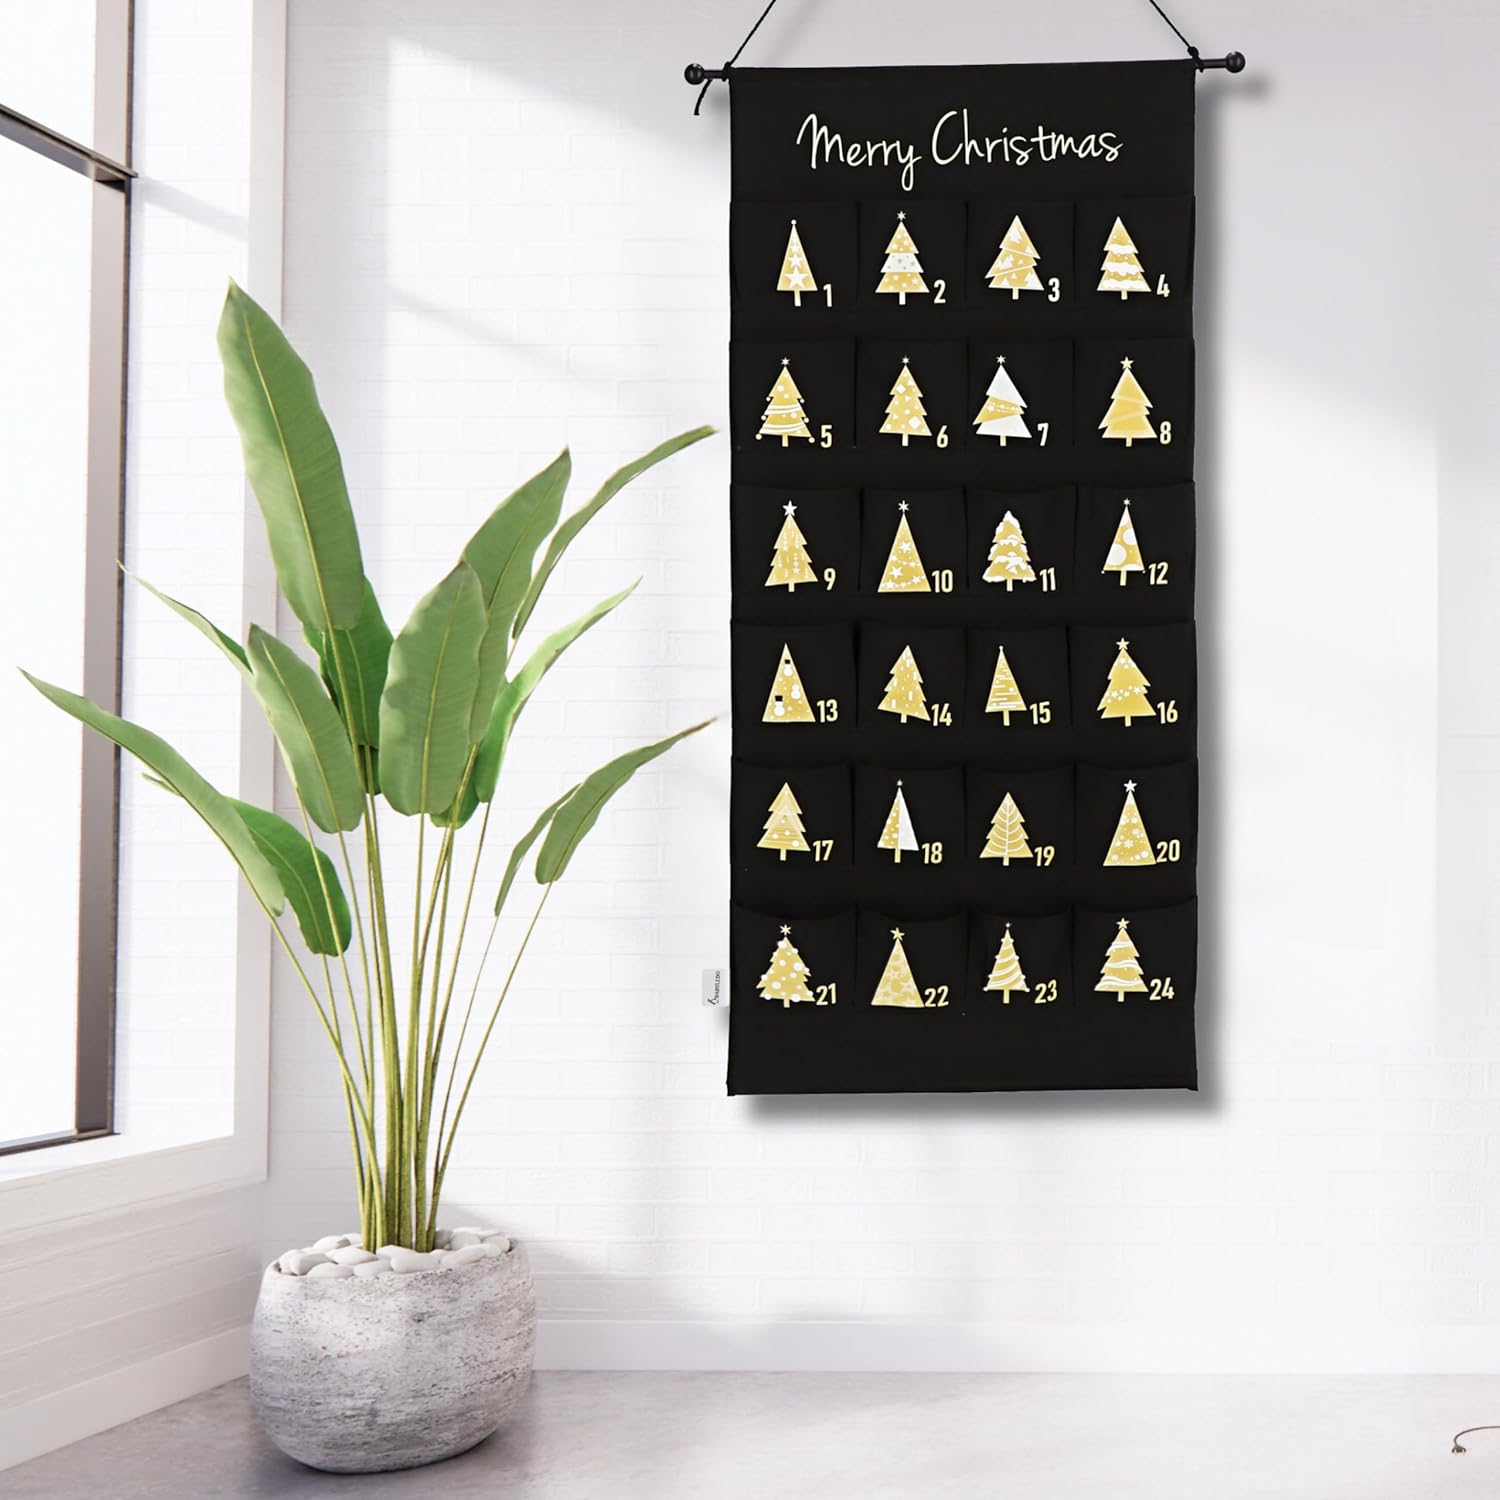 Advent Calendar for Filling, High-Quality Linen Fabric, 24 Compartments, for Hanging, with Wooden Bar, 108 x 51 cm [Black, Gold] (Black)